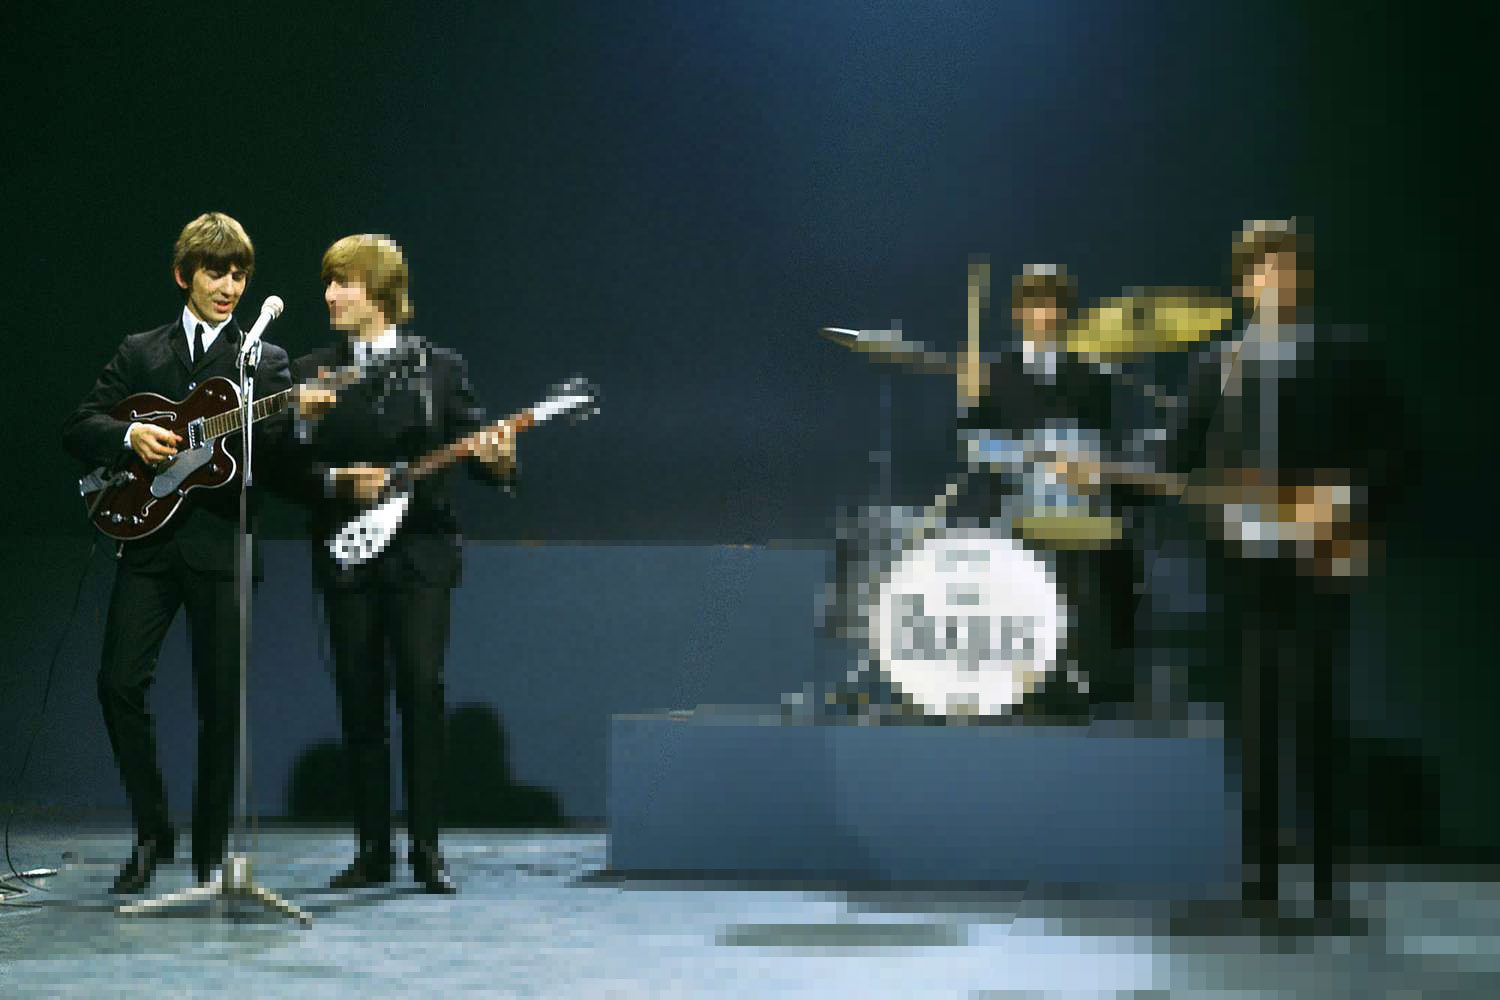 This AI Imagines What The Beatles Would Sound Like If They Were Still Together Today

